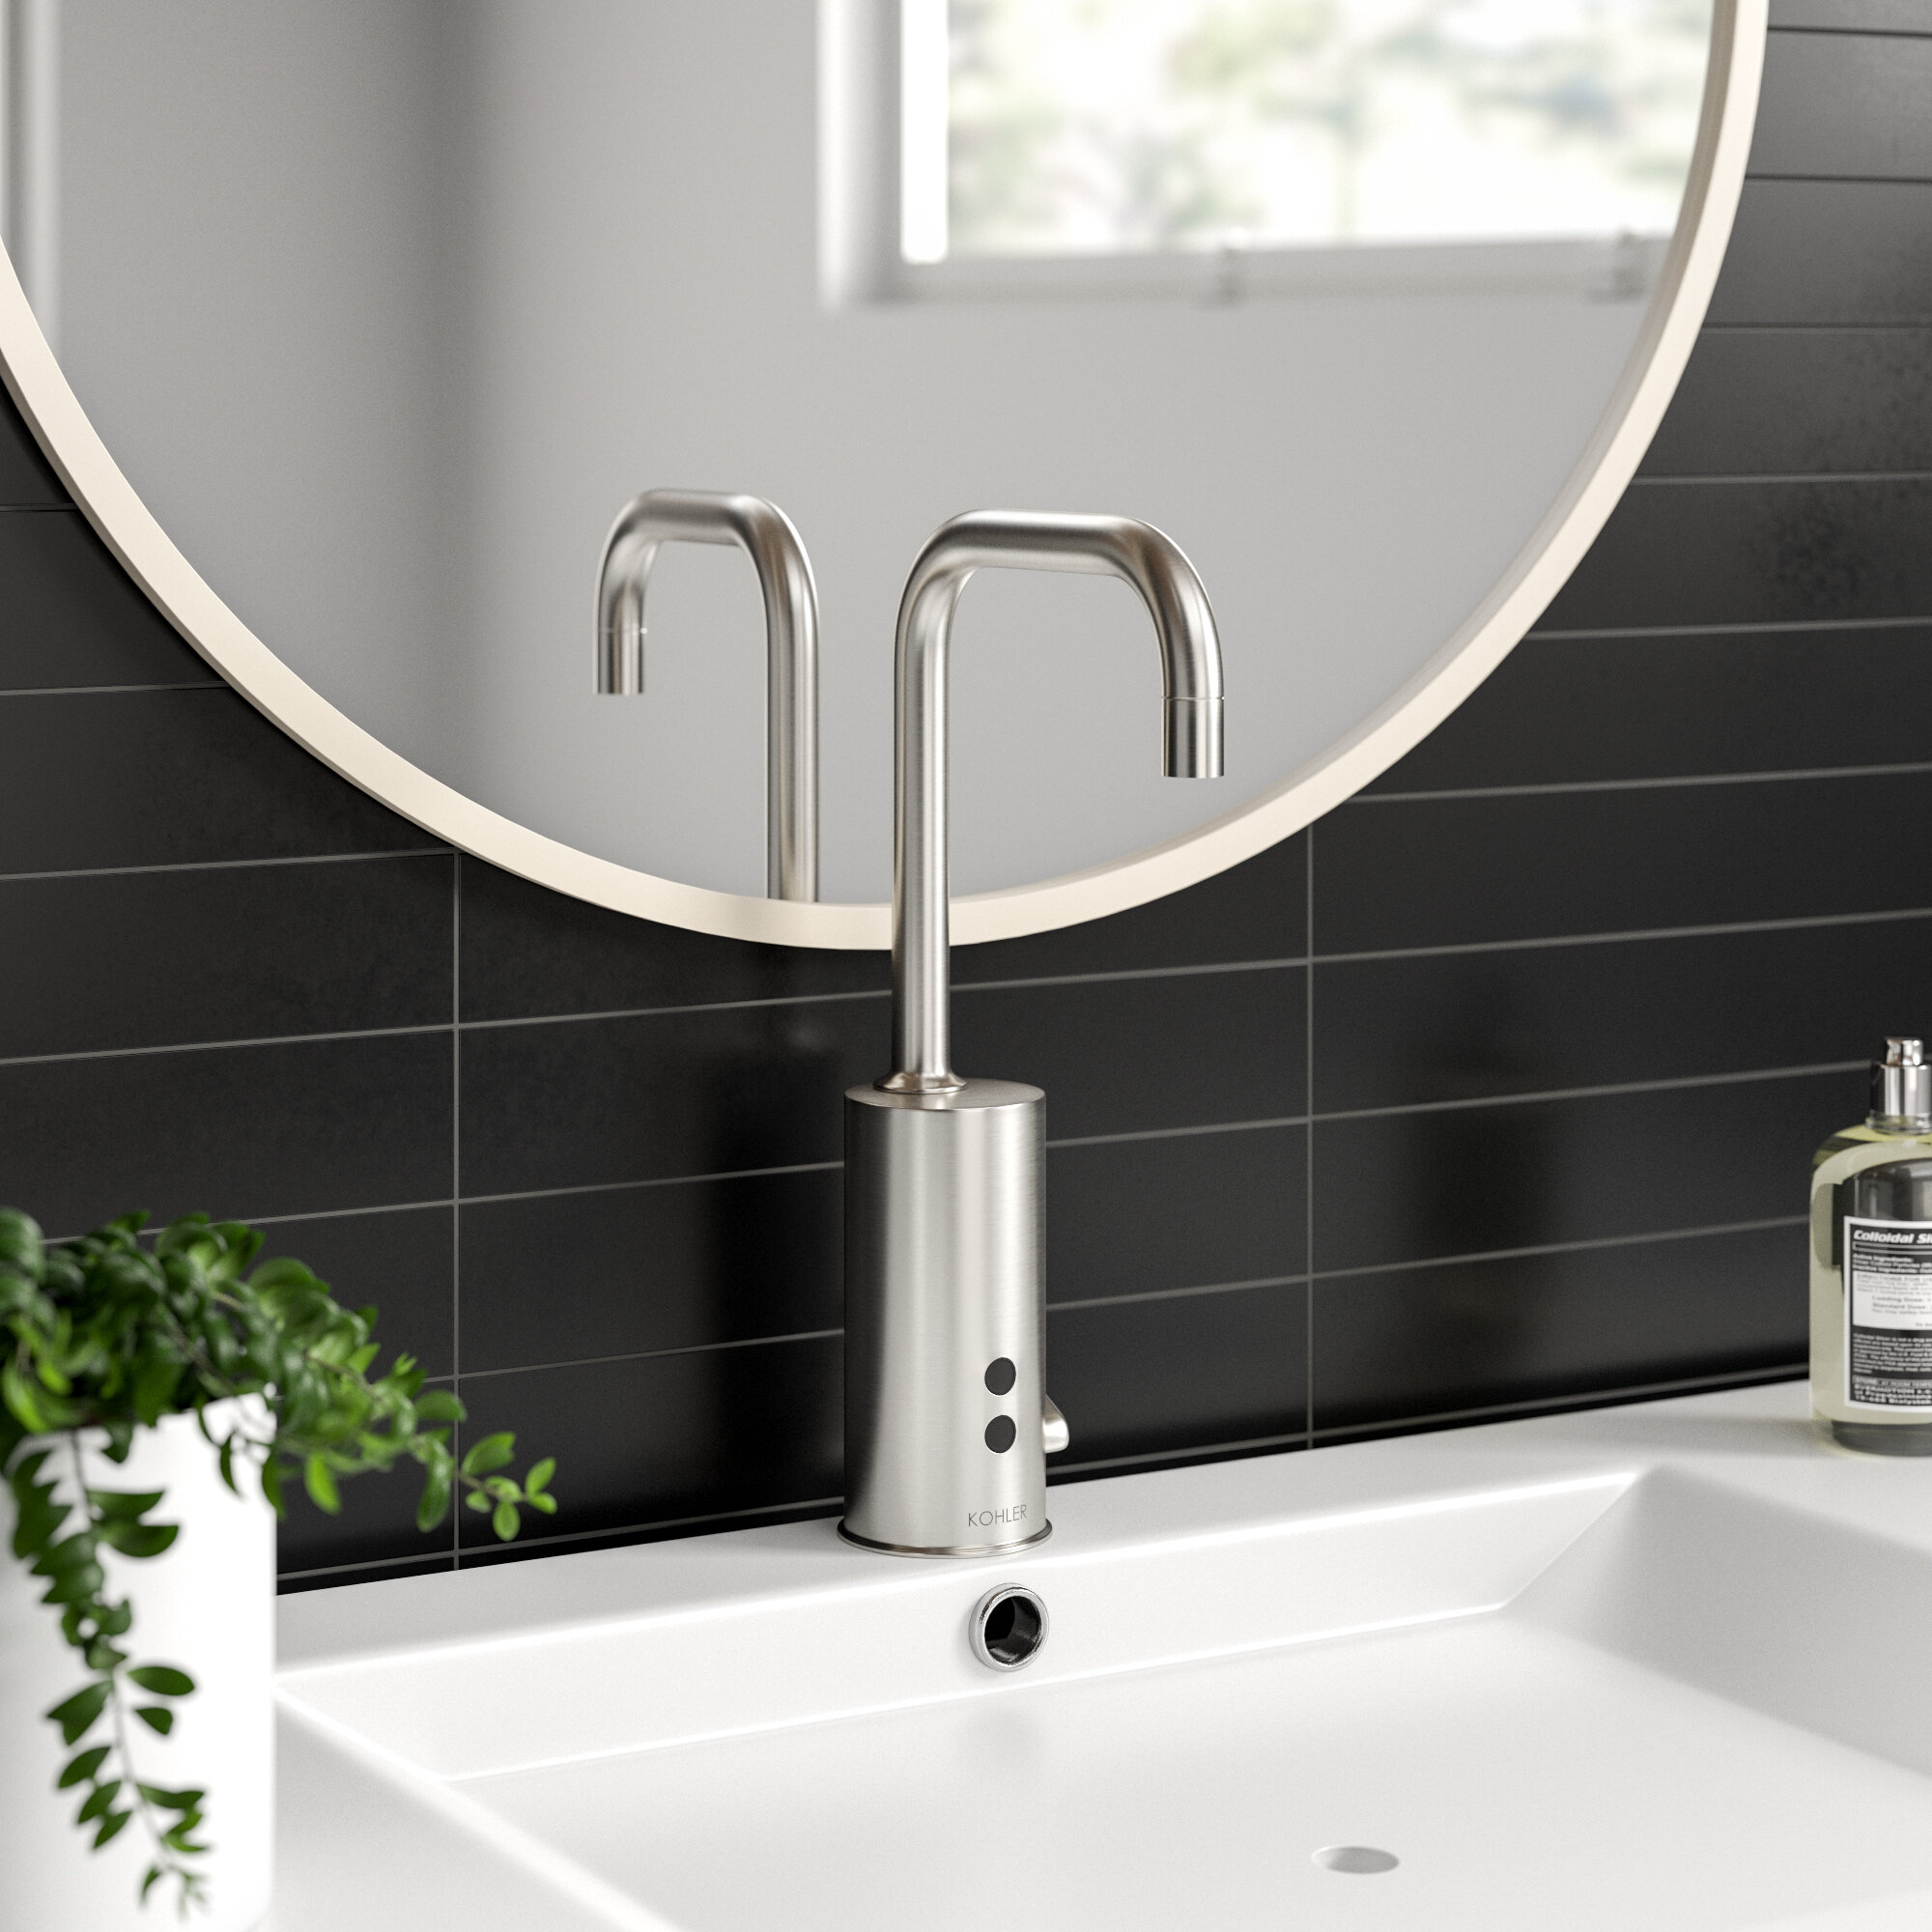 K-7519-CP Kohler Gooseneck Single-Hole Touchless Hybrid Energy Cell-Powered  Commercial Faucet with Insight Technology and Temperature Mixer Wayfair